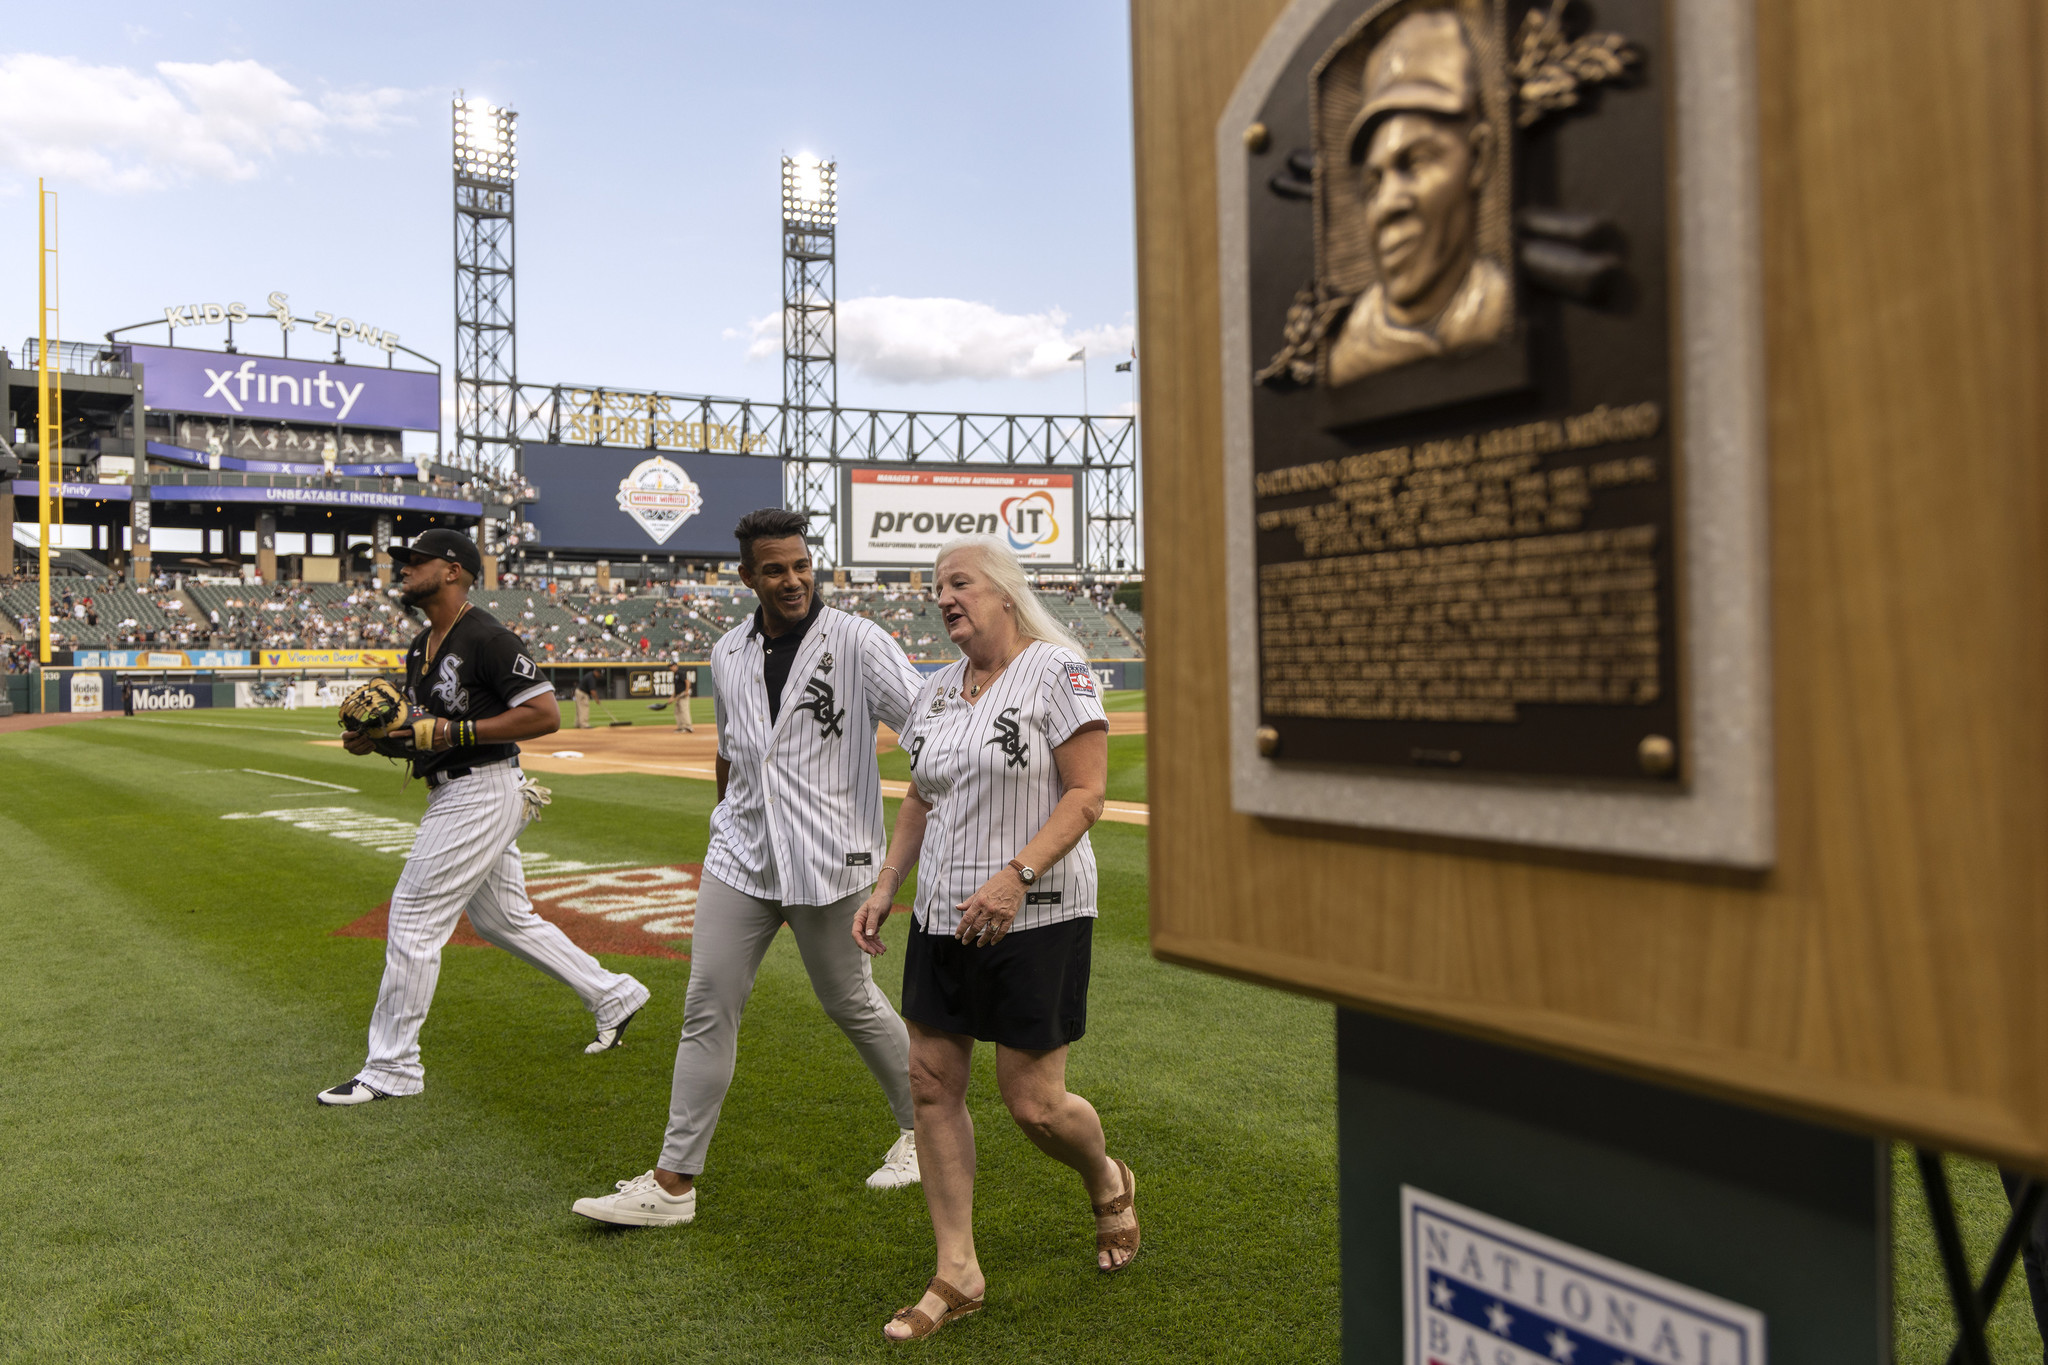 Cubs, Sox pay throwback tribute to Banks, Minoso